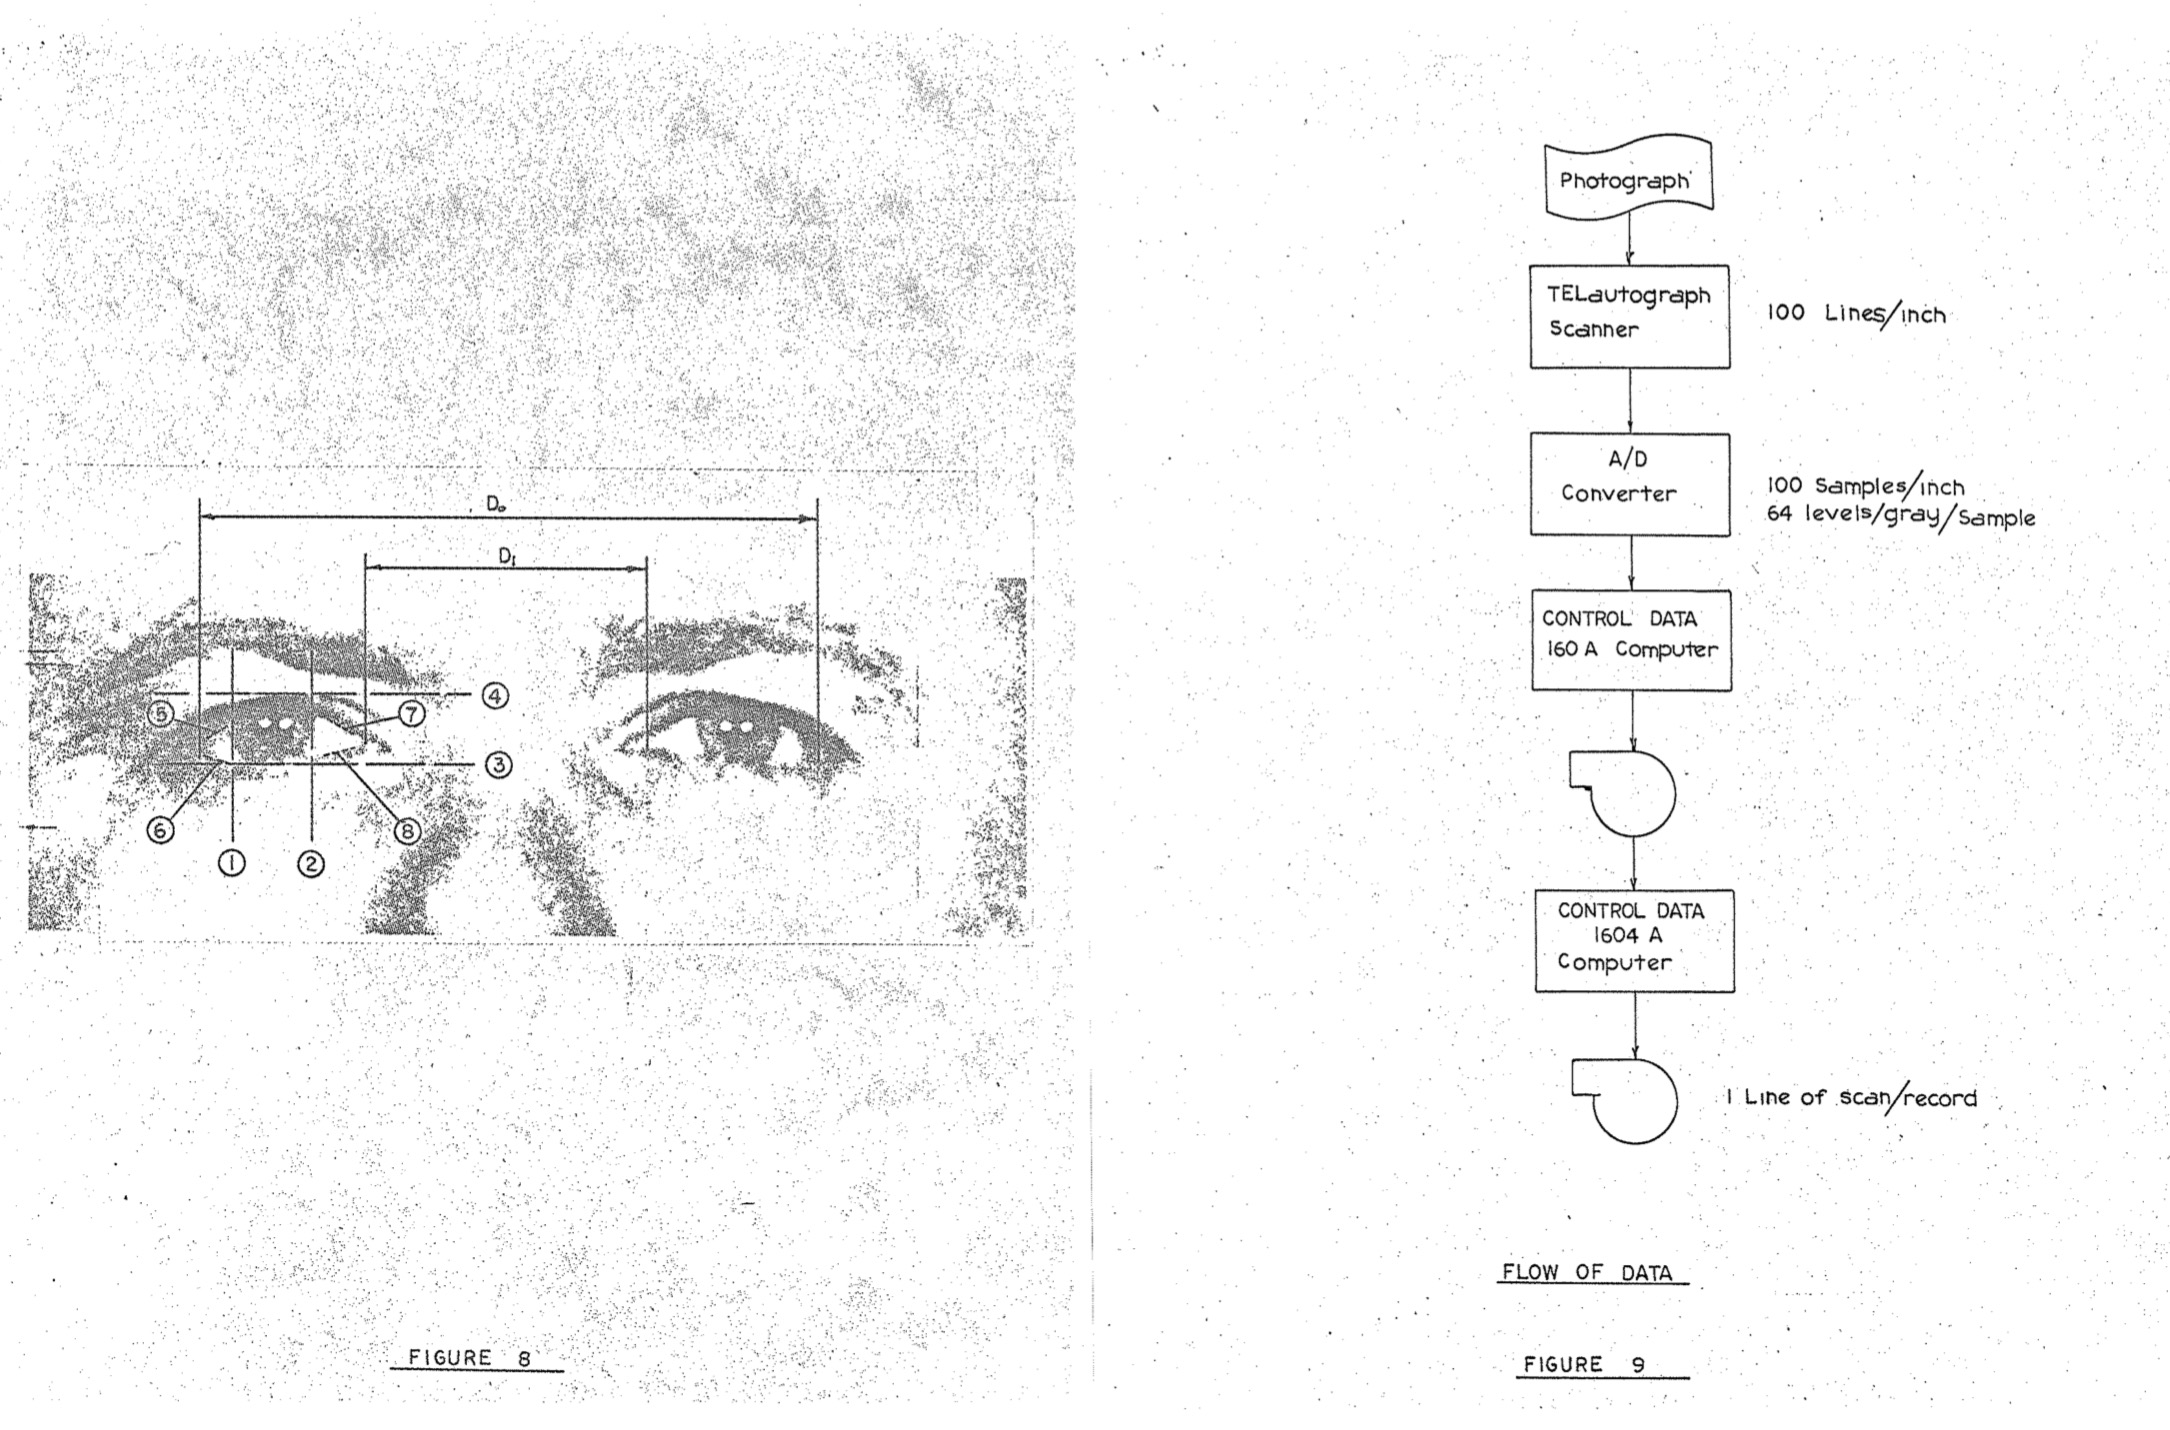 Figures from the 1963 “Proposal for a Study to Determine the Feasibility of a Simplified Face Recognition Machine” by Dr. W. W. Bledsoe of Panoramic Research, Inc.